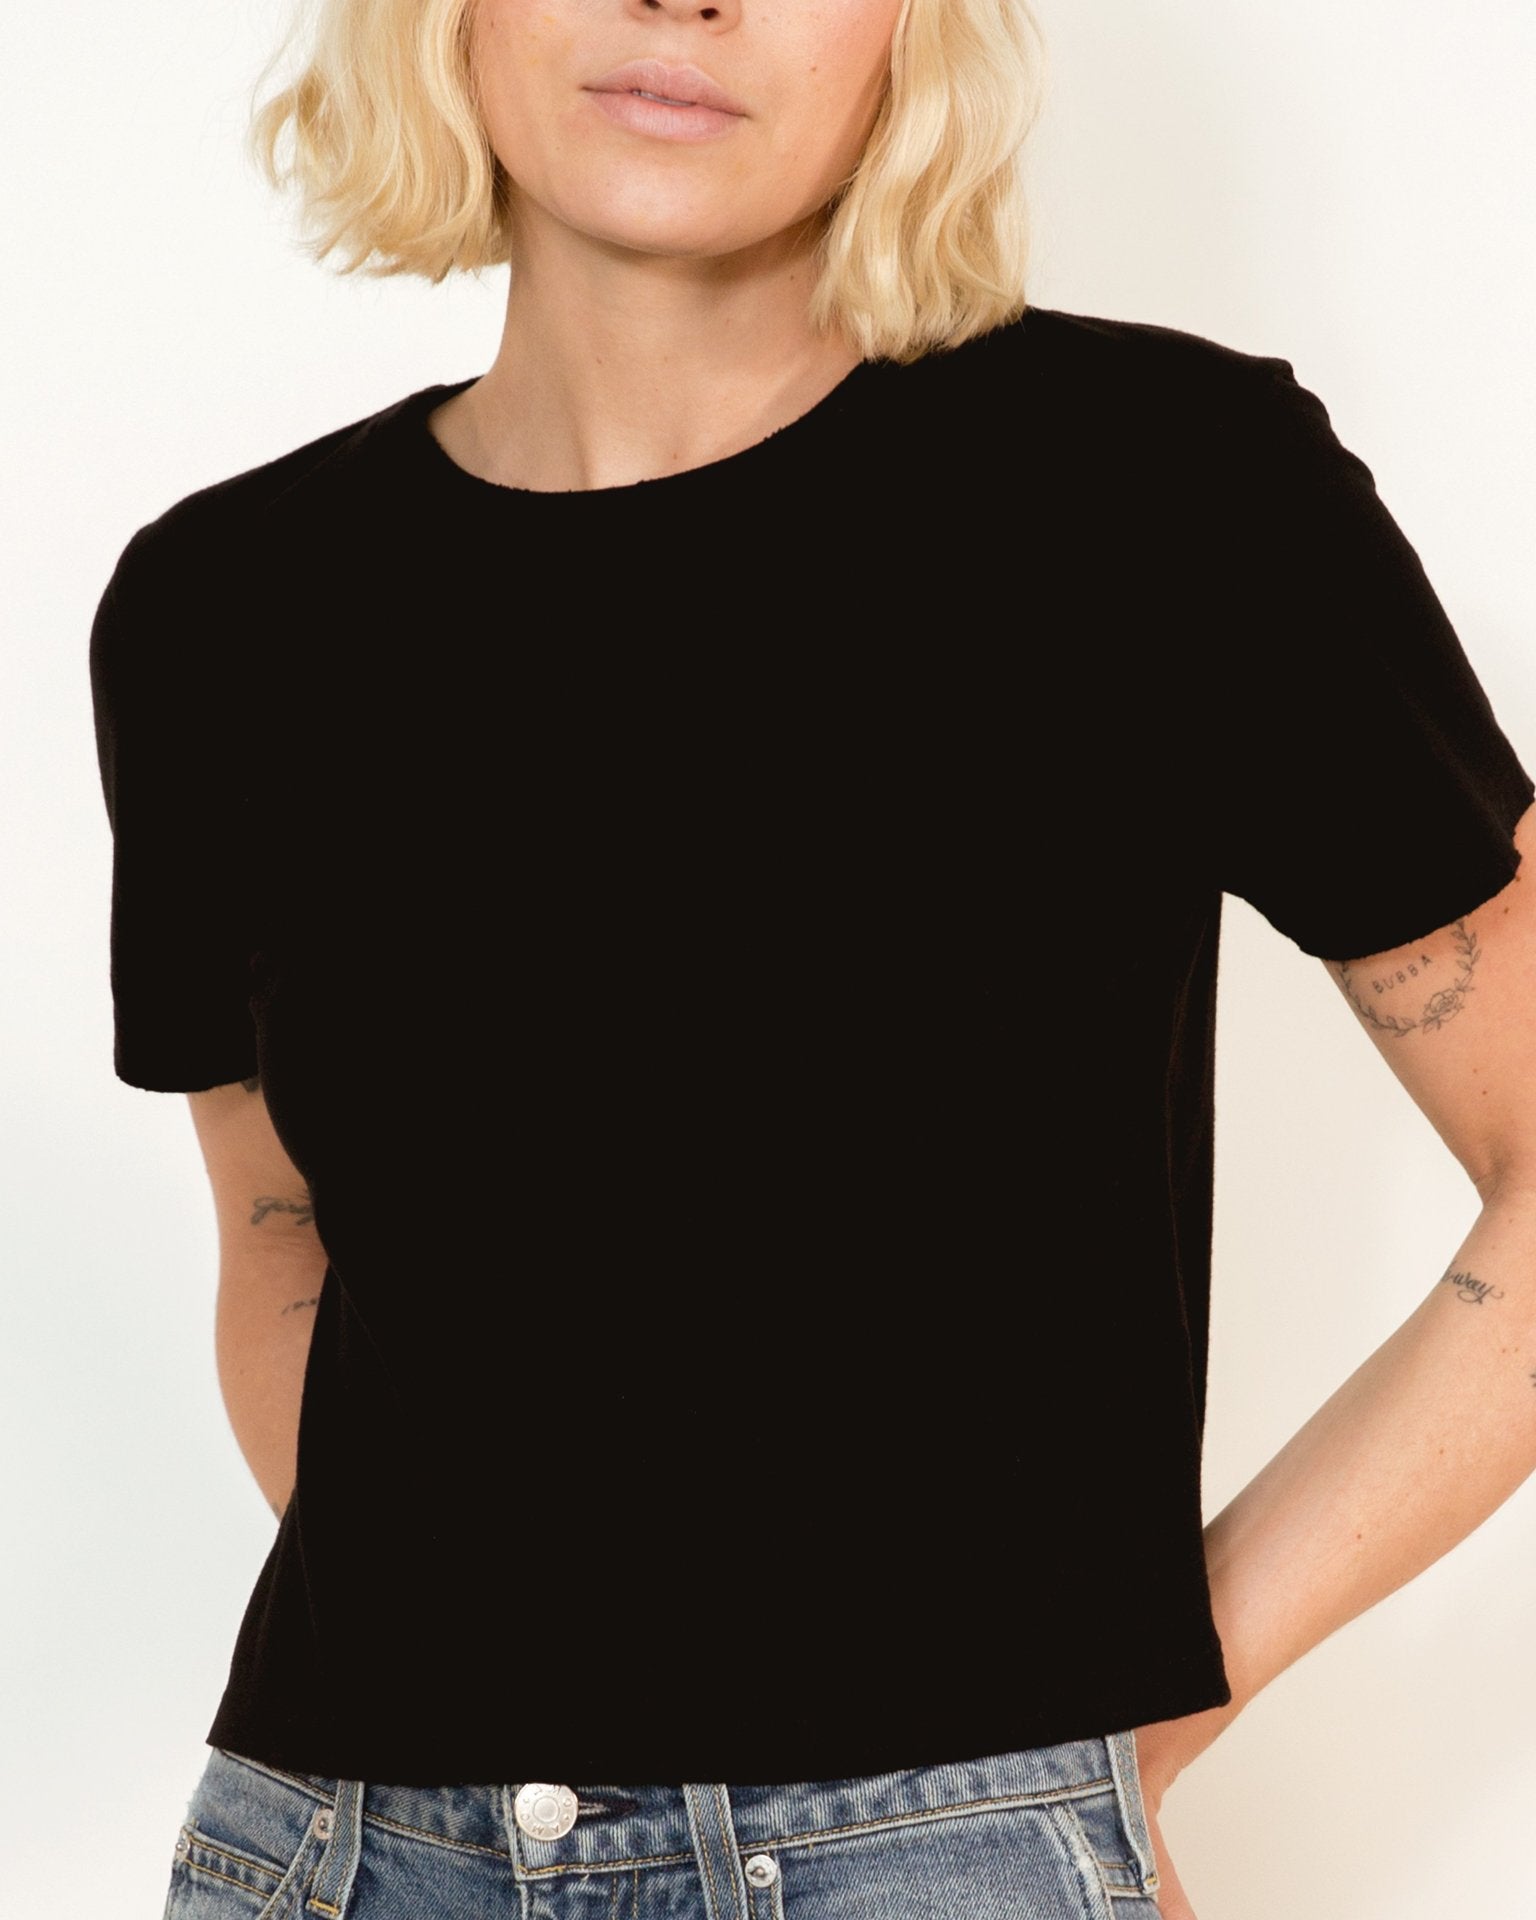 Babe Tee in Black